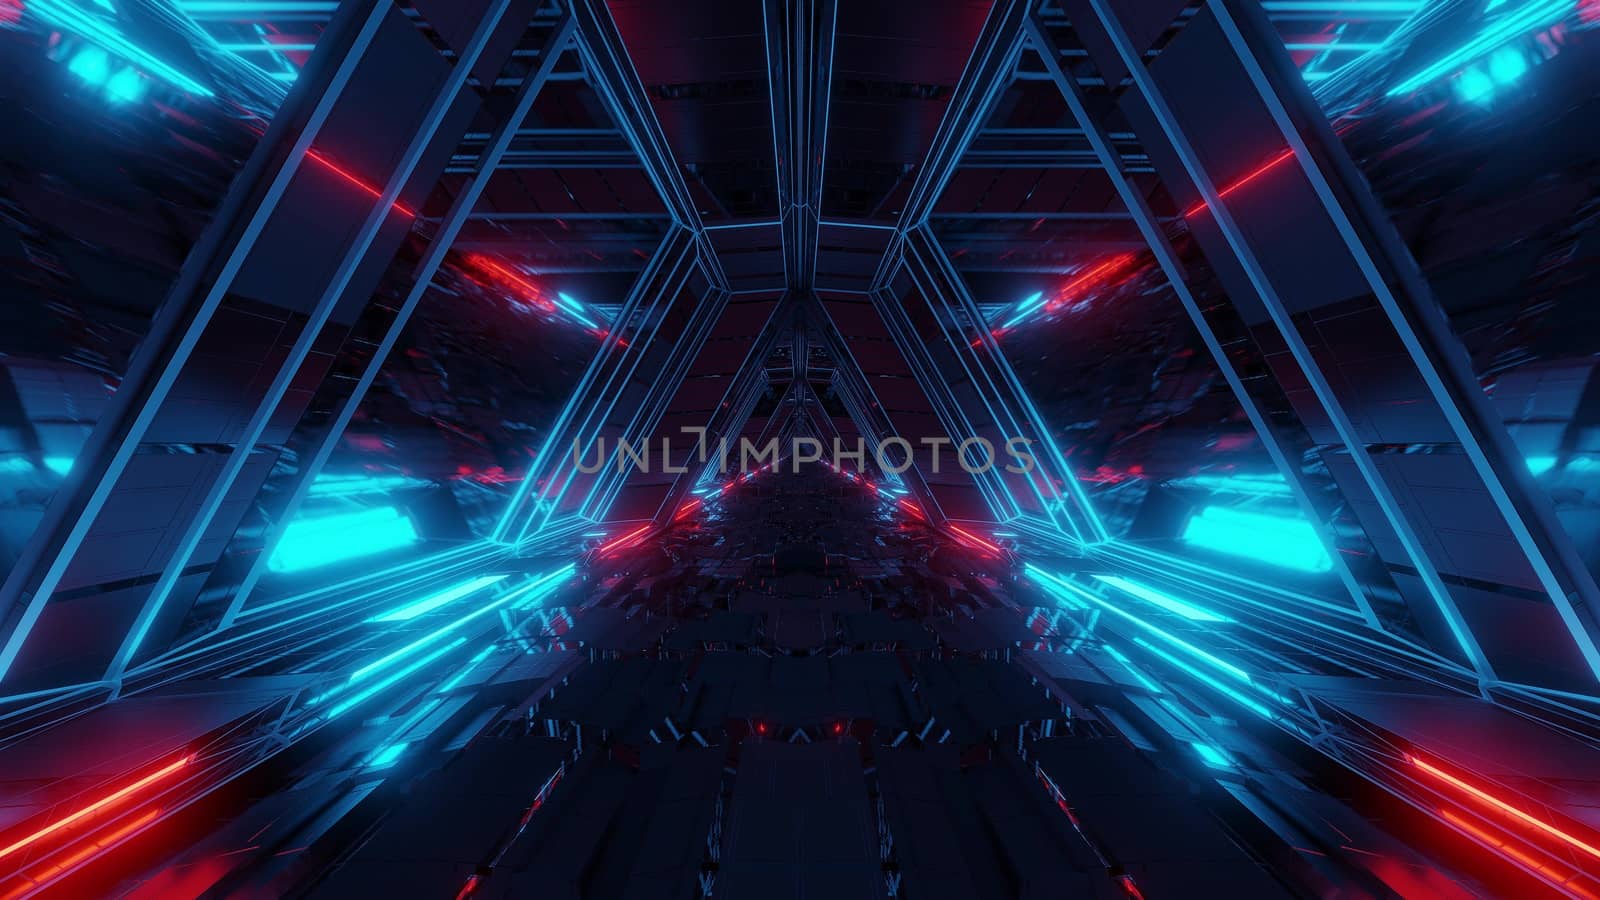 futuristic sci-fi space war ship hangar tunnel corridor with reflective glass windows 3d illustration background wallpaper by tunnelmotions